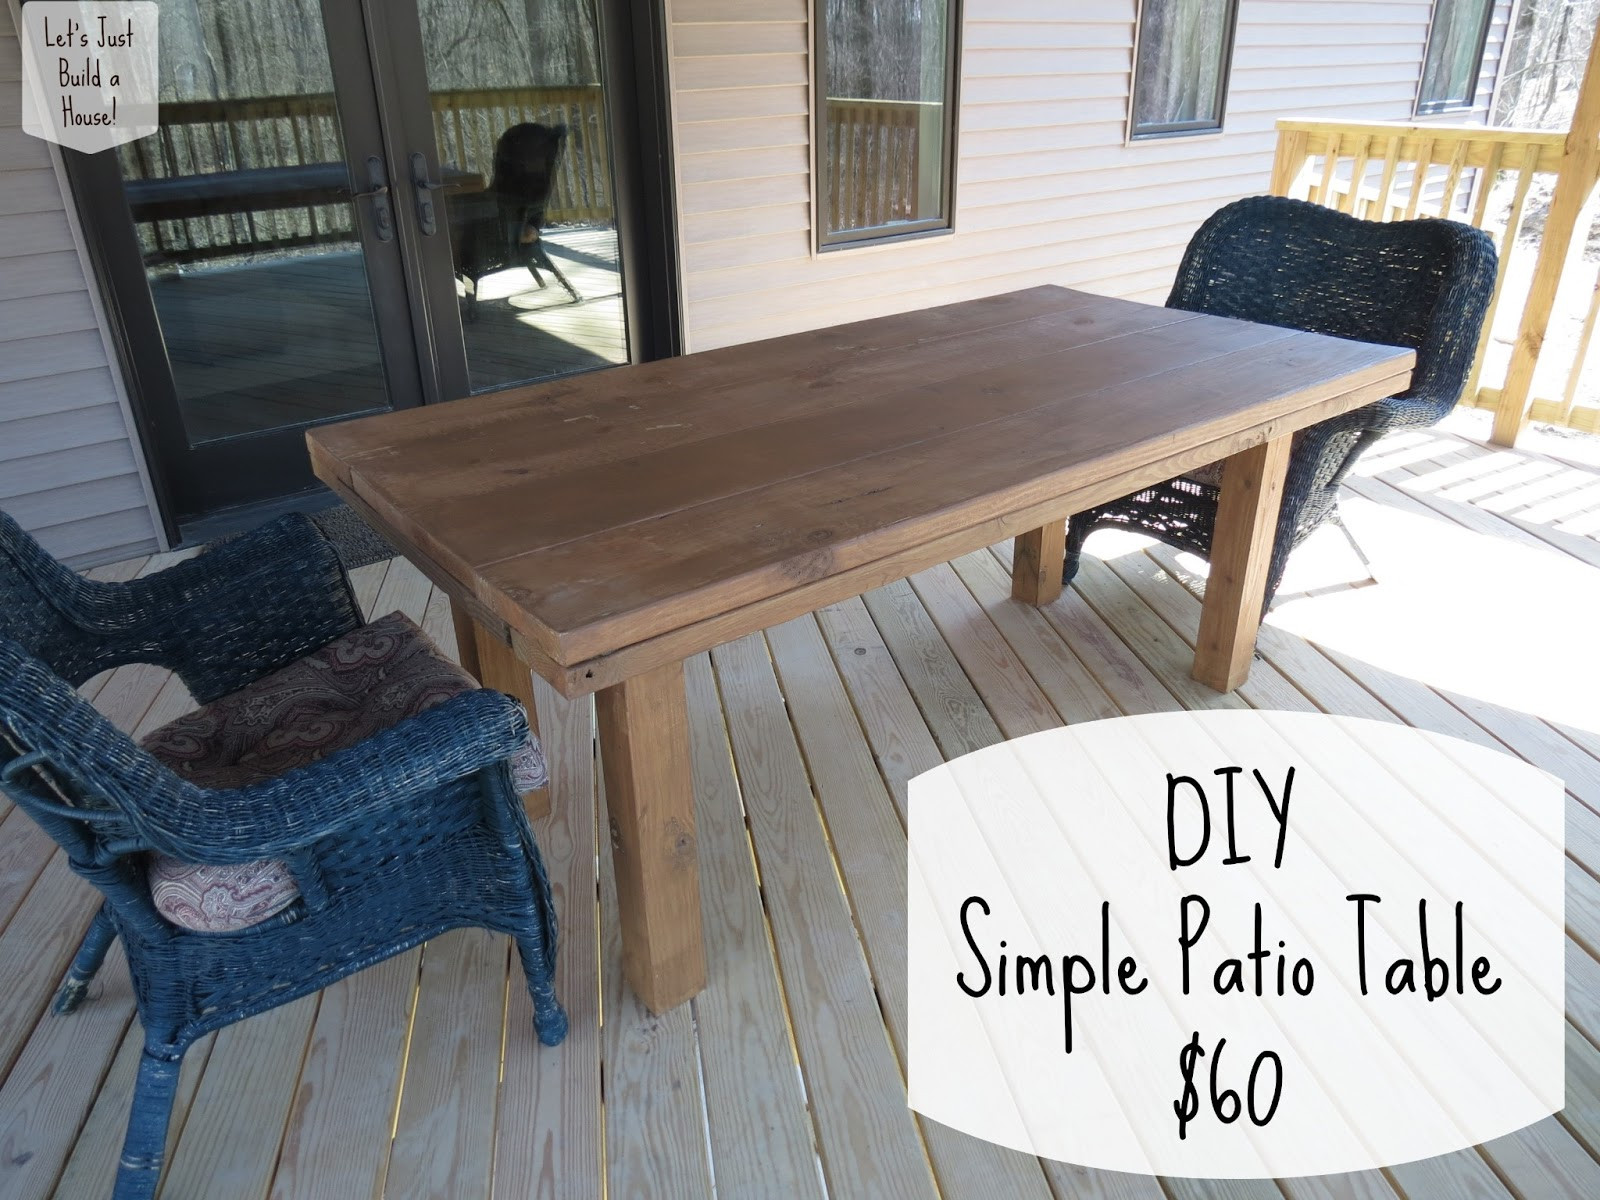 Easy DIY Outdoor Table
 Let s Just Build a House DIY Simple Patio Table Details